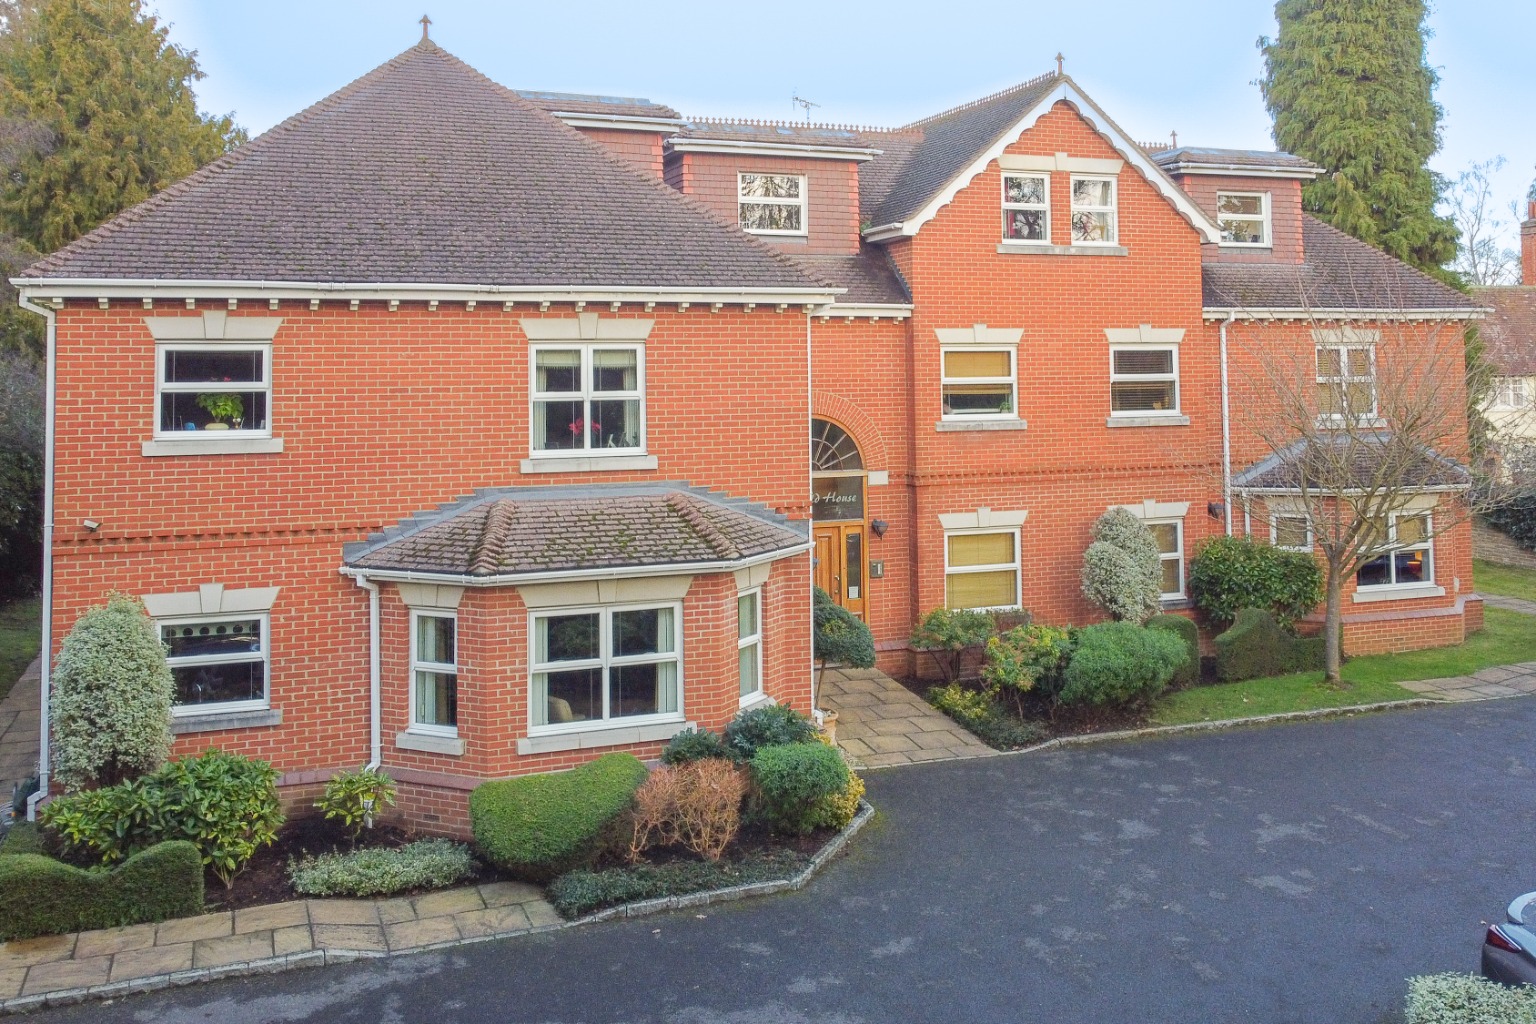 Set within enclosed grounds is this very well presented ground floor luxury apartment, with two large bedrooms, the master bedroom with an en-suite, a 19'11 x 15' living/dining room, kitchen/breakfast room with integrated appliances and granite work surfaces, offered for sale with no onward chain.